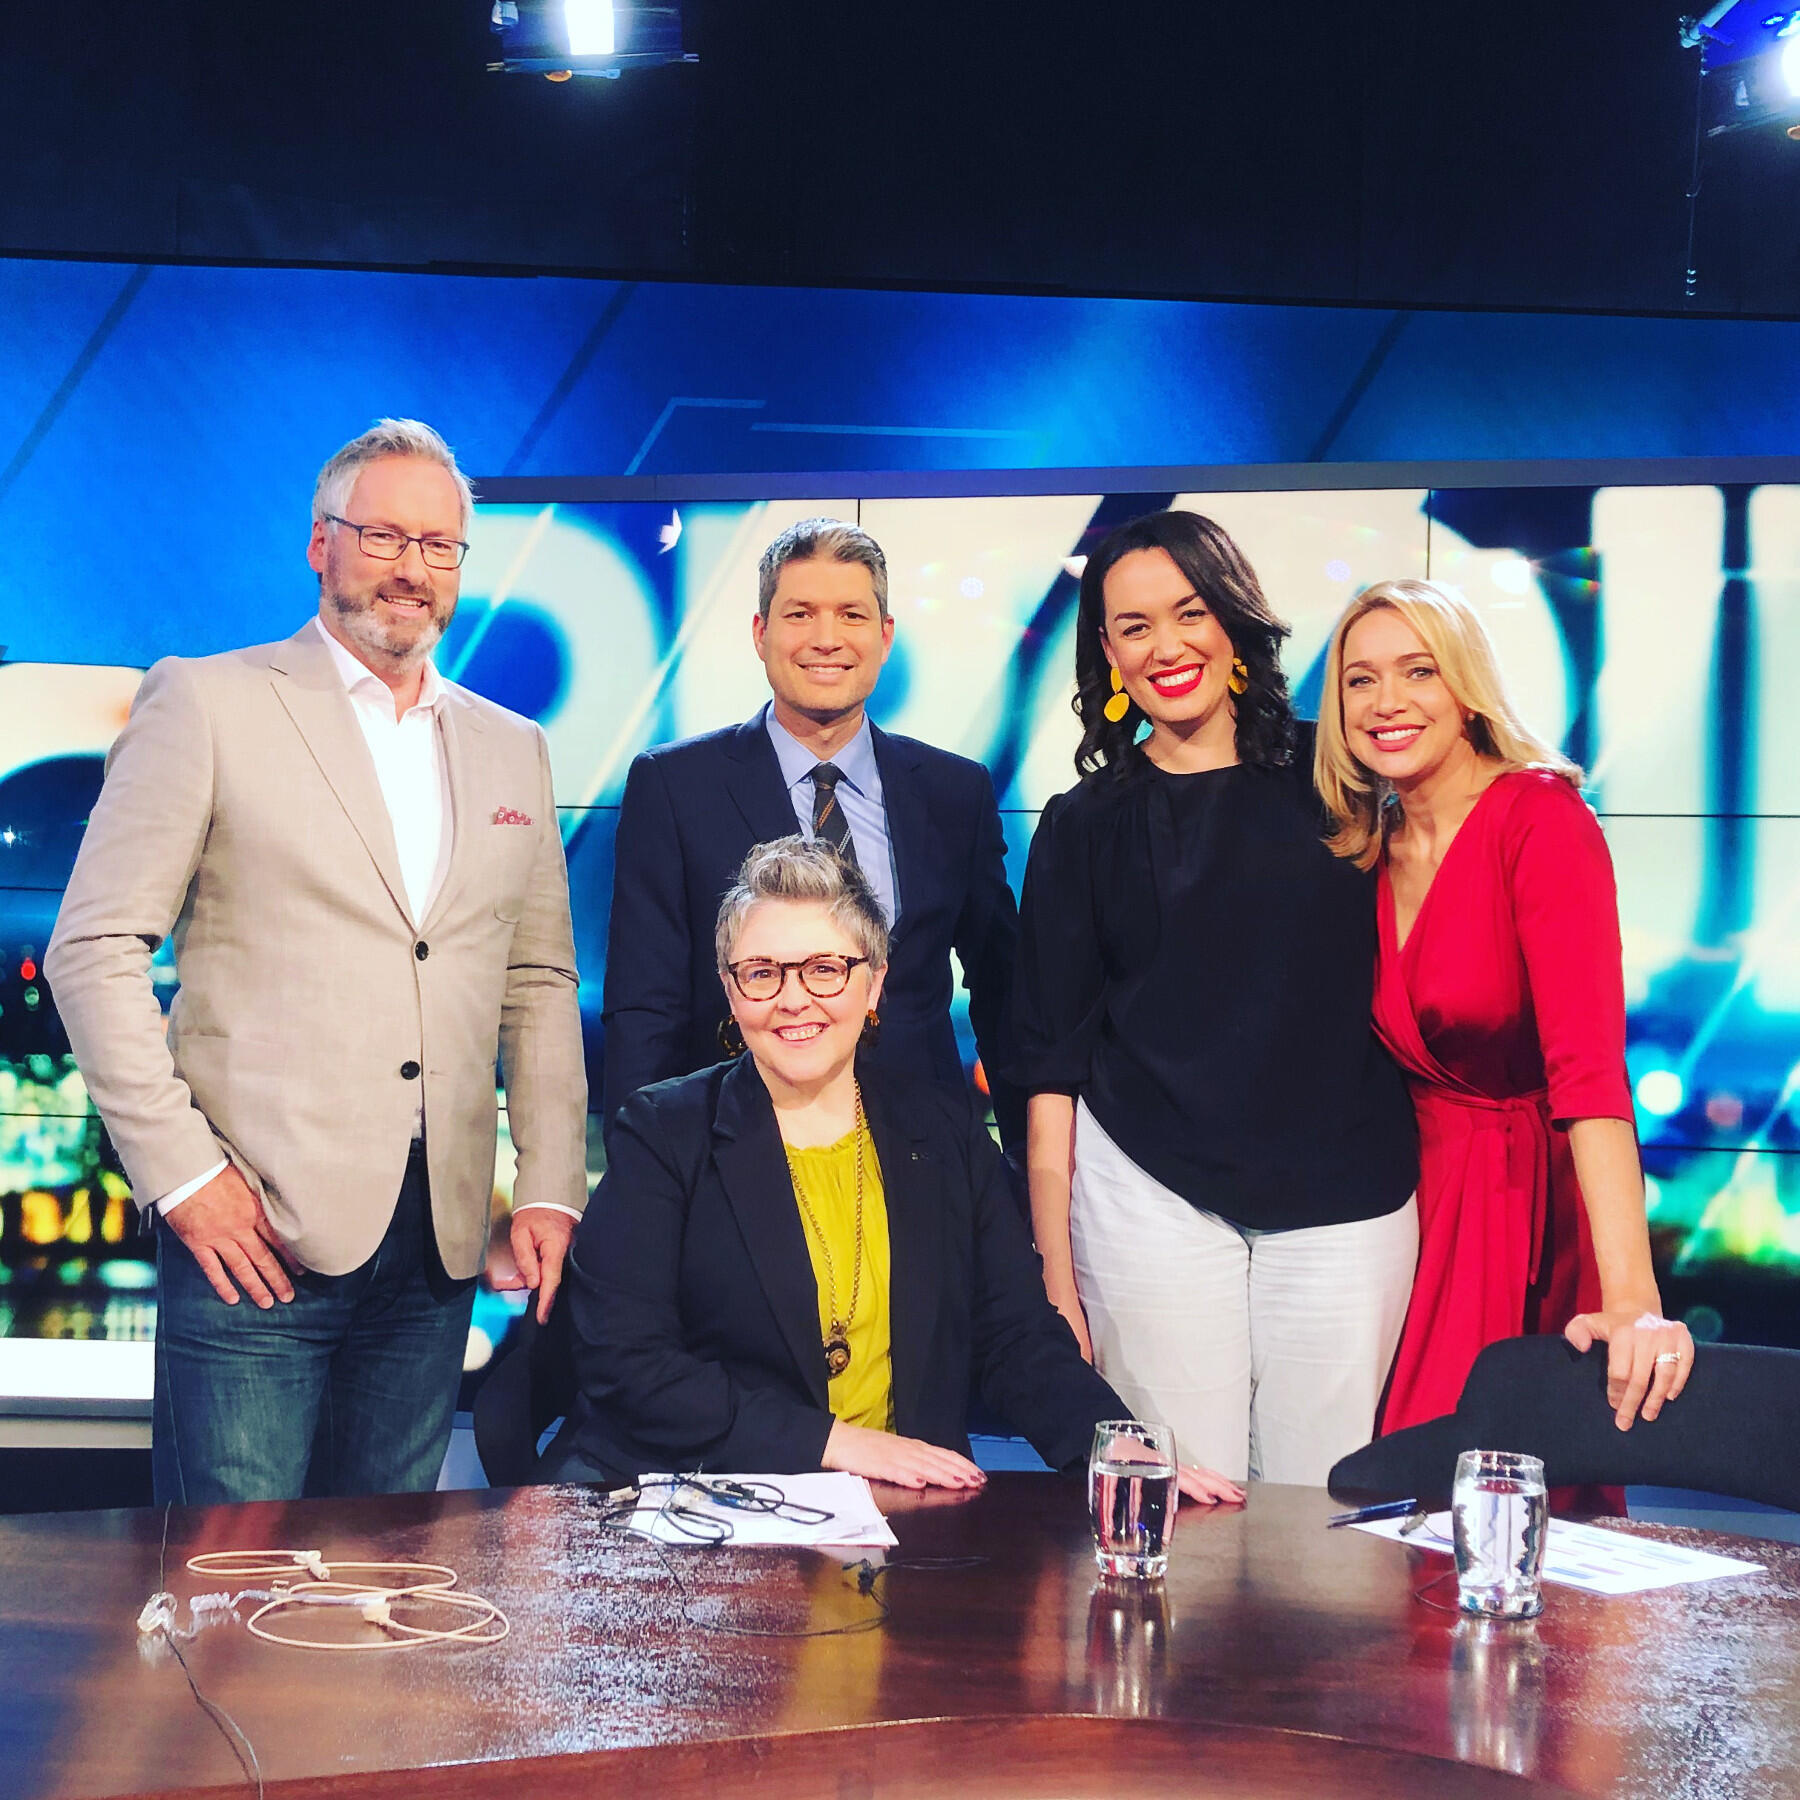 While in New Zealand, Peace was interviewed on a national TV show called “The Project,” on which she discussed the dangers of vaping. (Courtesy photo)
